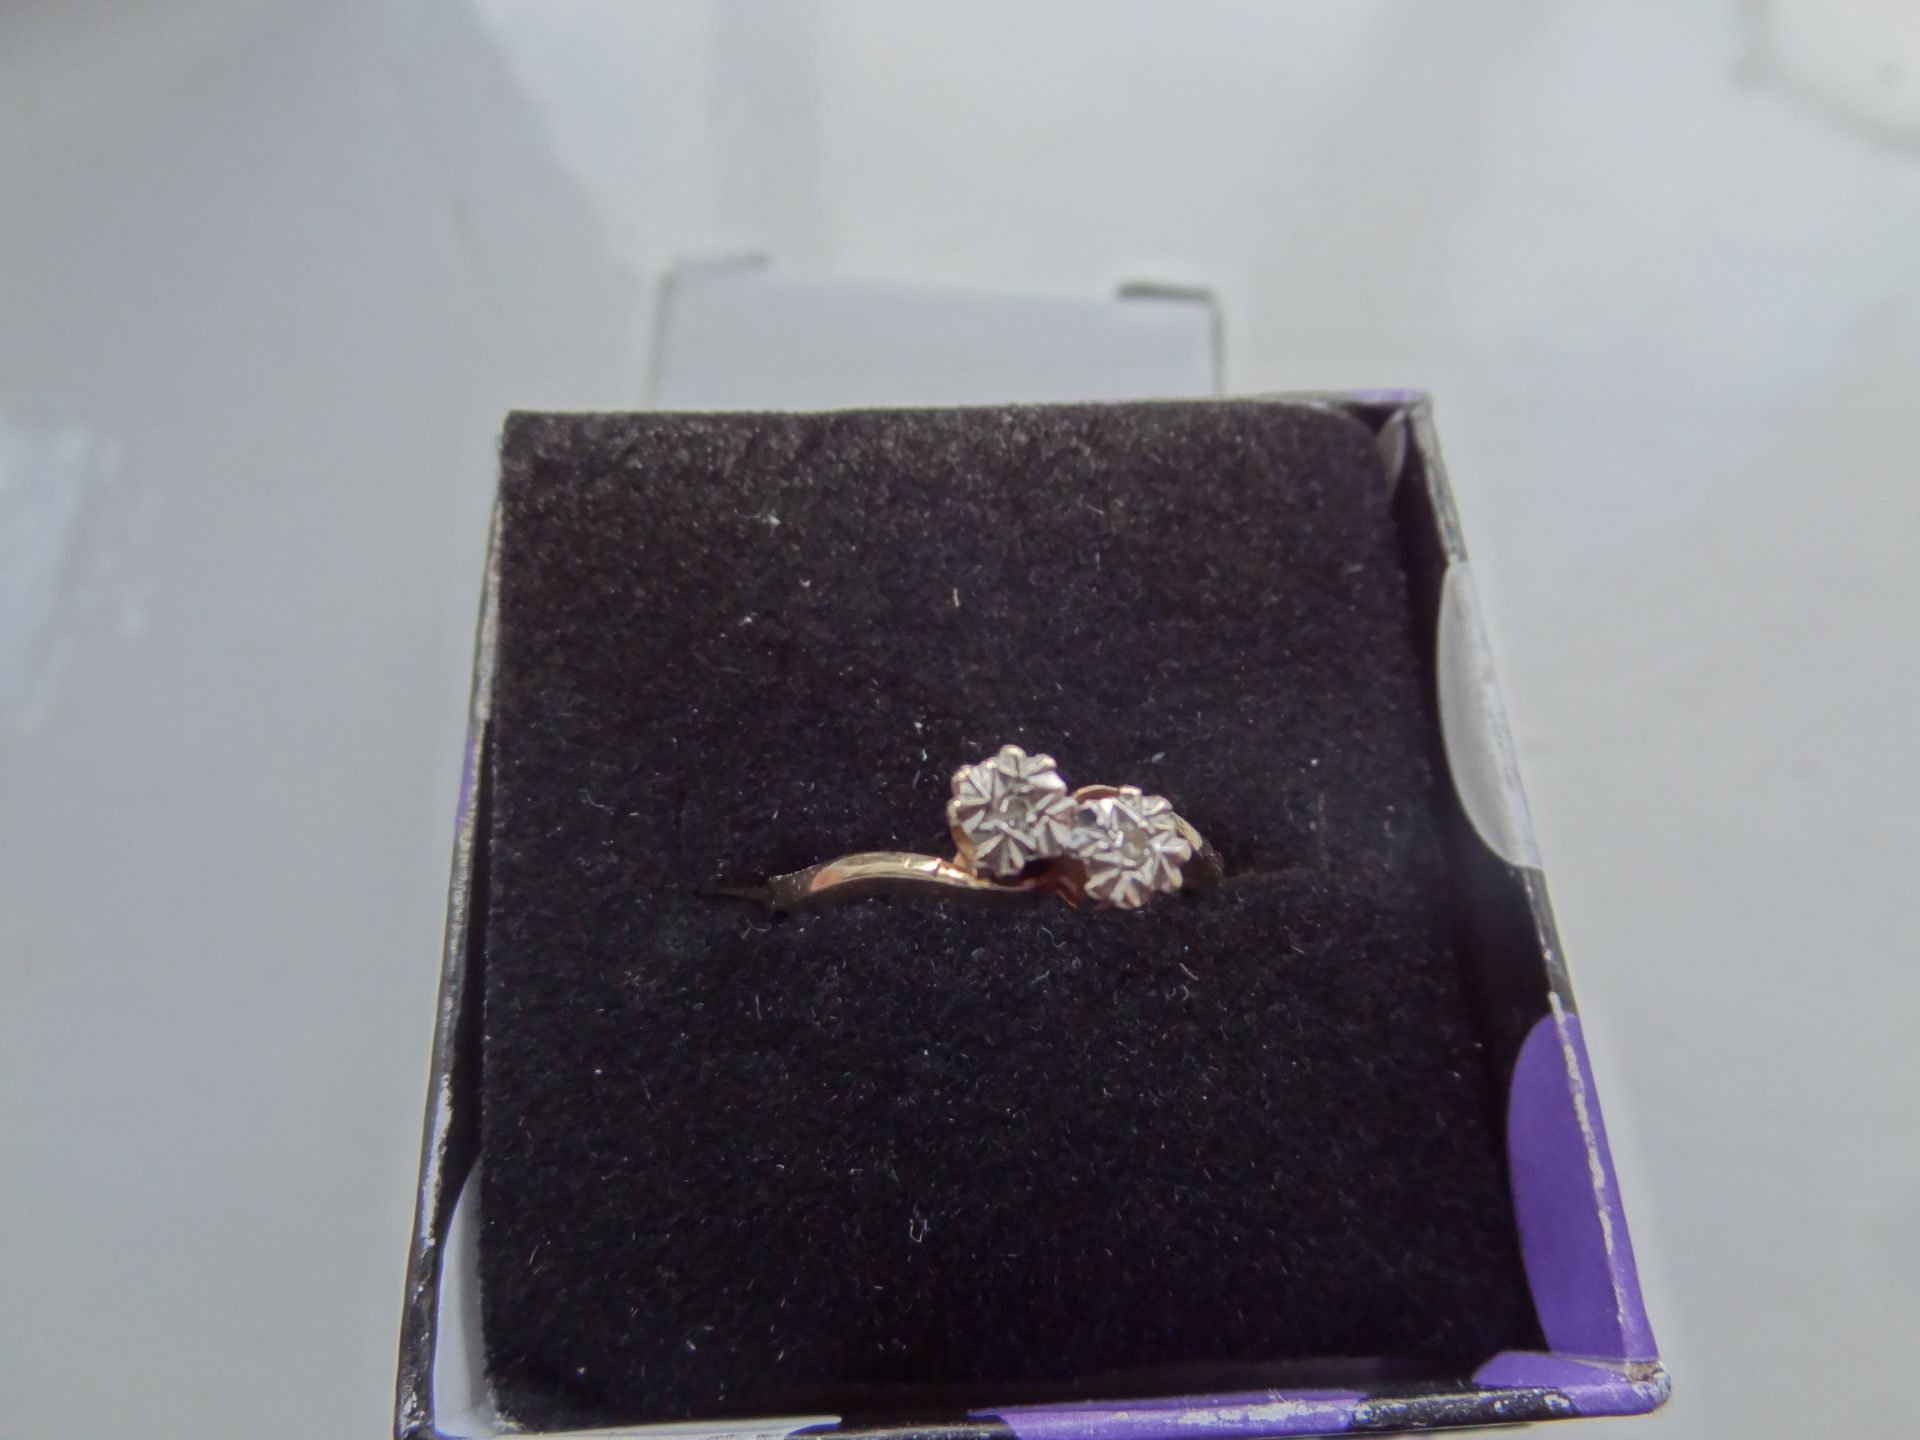 9CT Gold Ring Comprising Two Round Cut Diamond sin a White Gold Illusion Setting